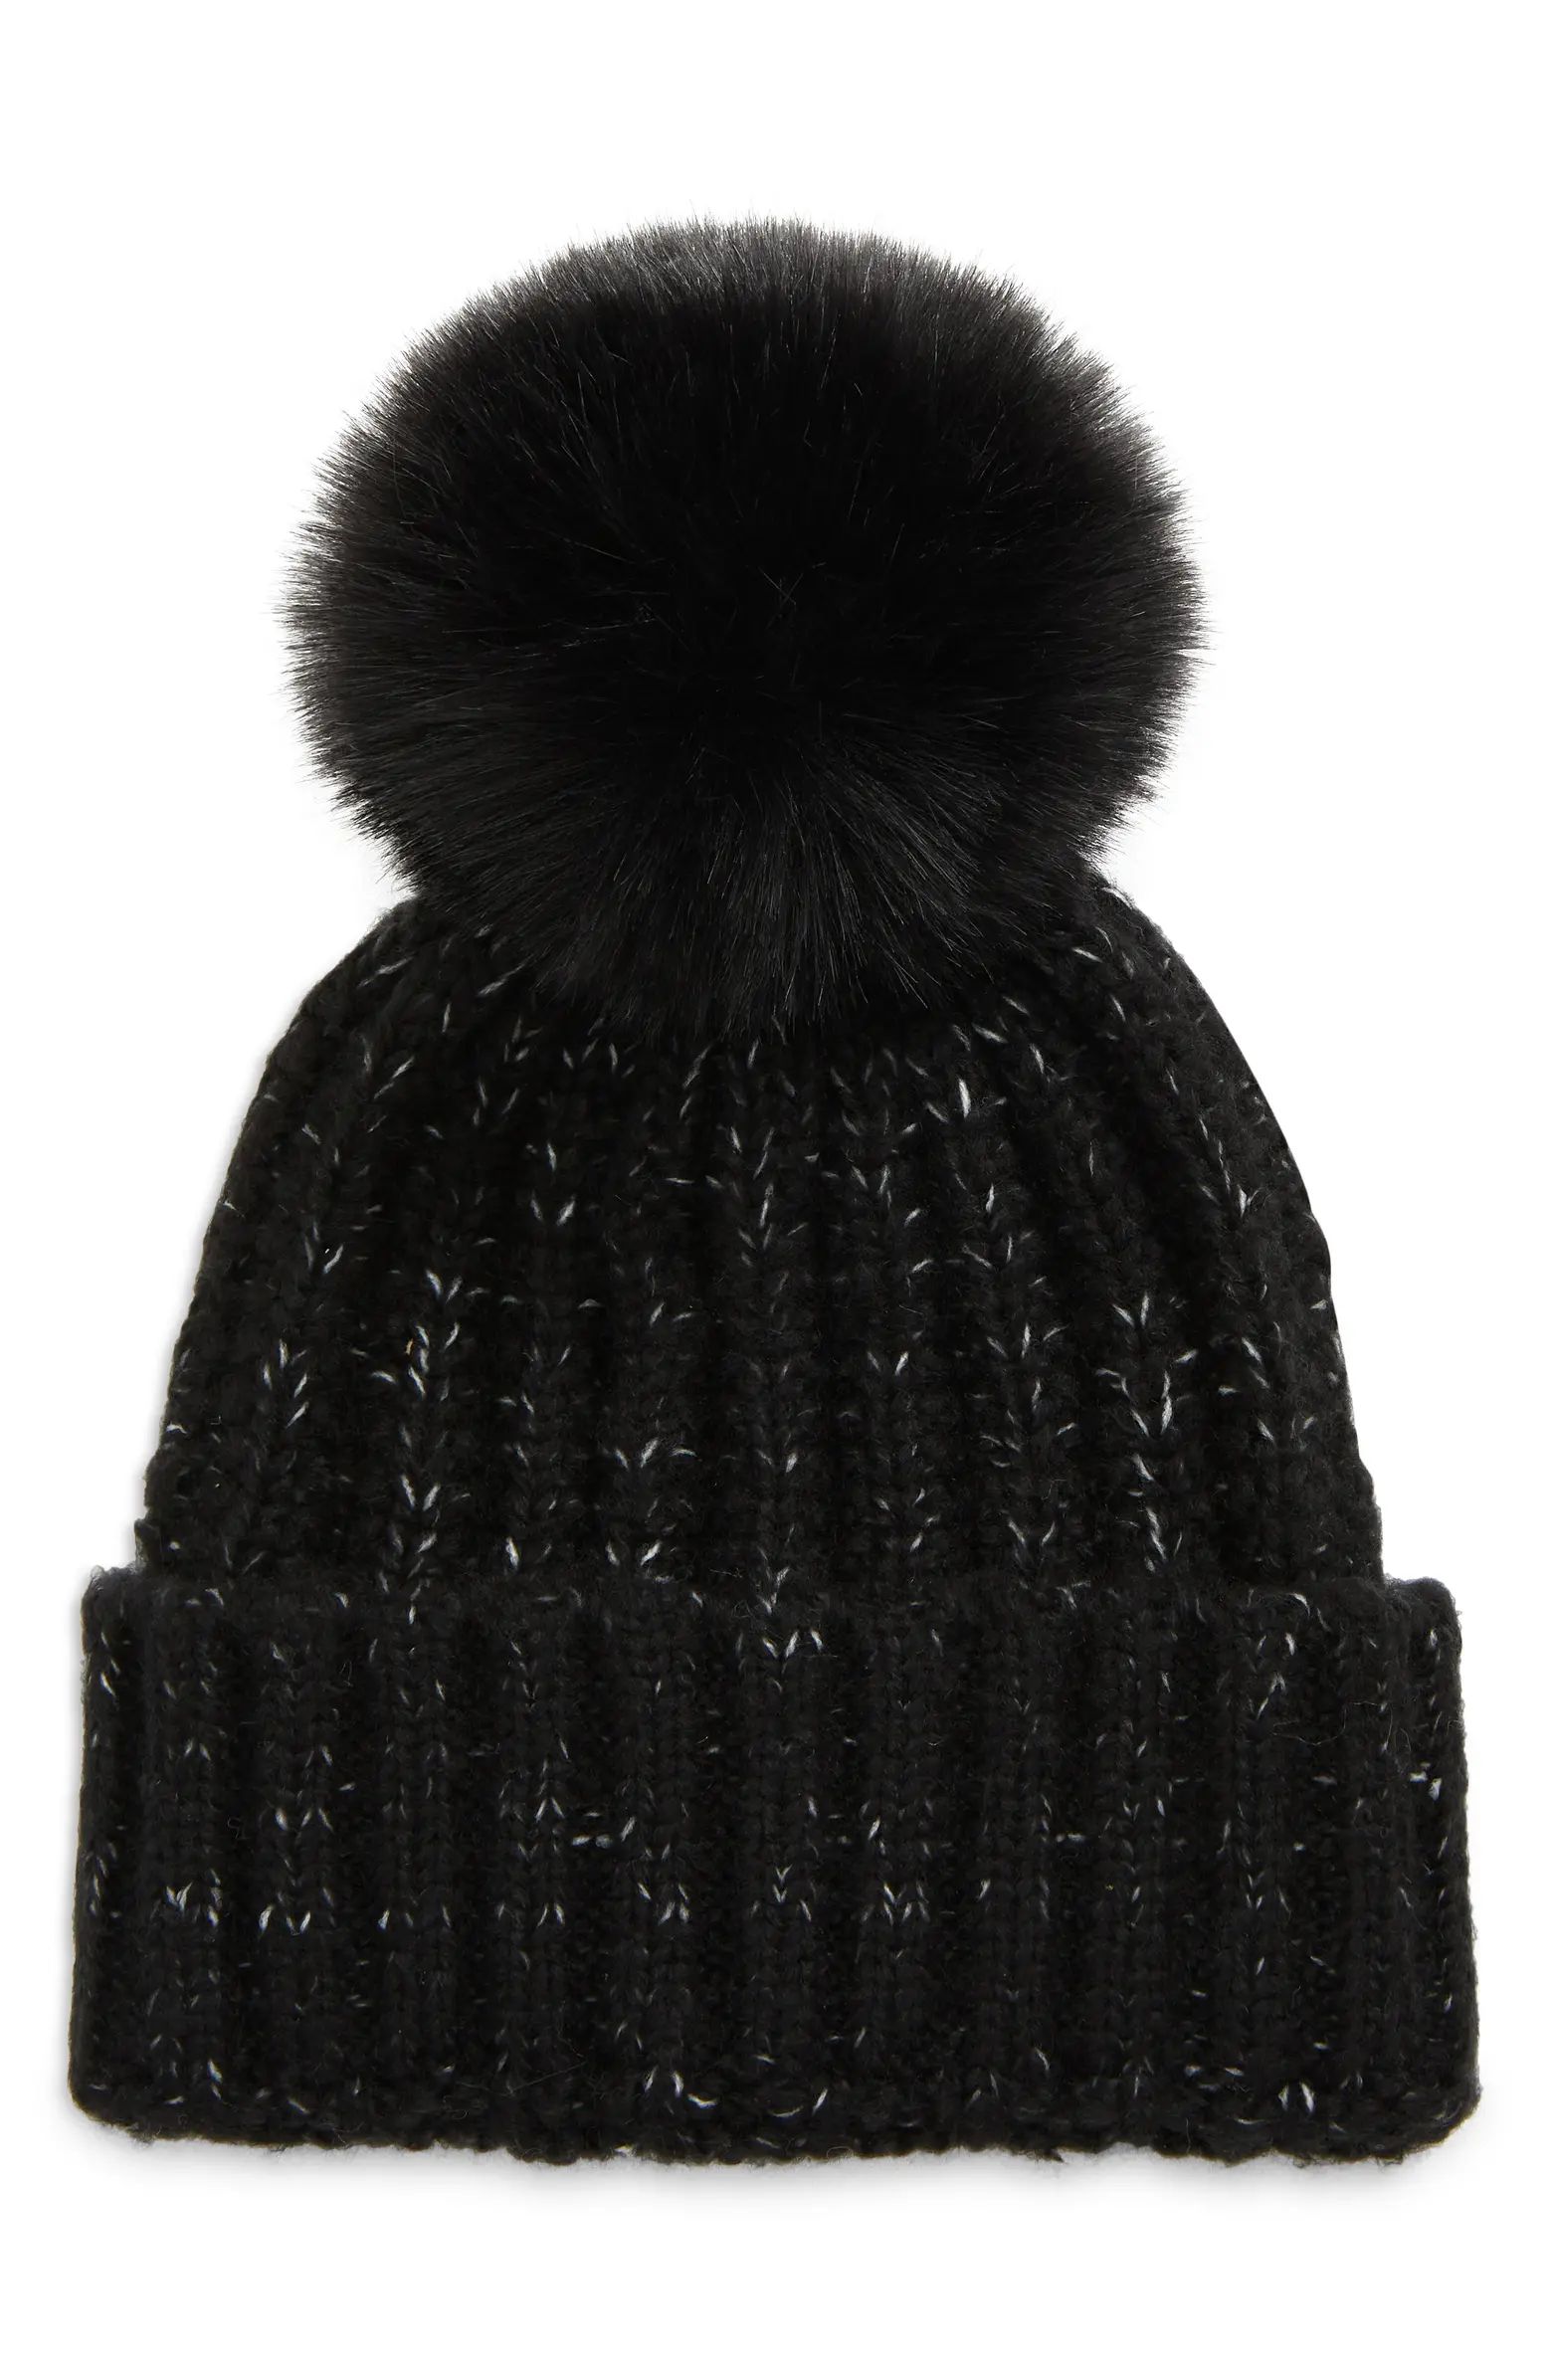 Kyi Kyi Chunky Wool Blend Beanie with Faux Fur Pom | Nordstrom | Nordstrom